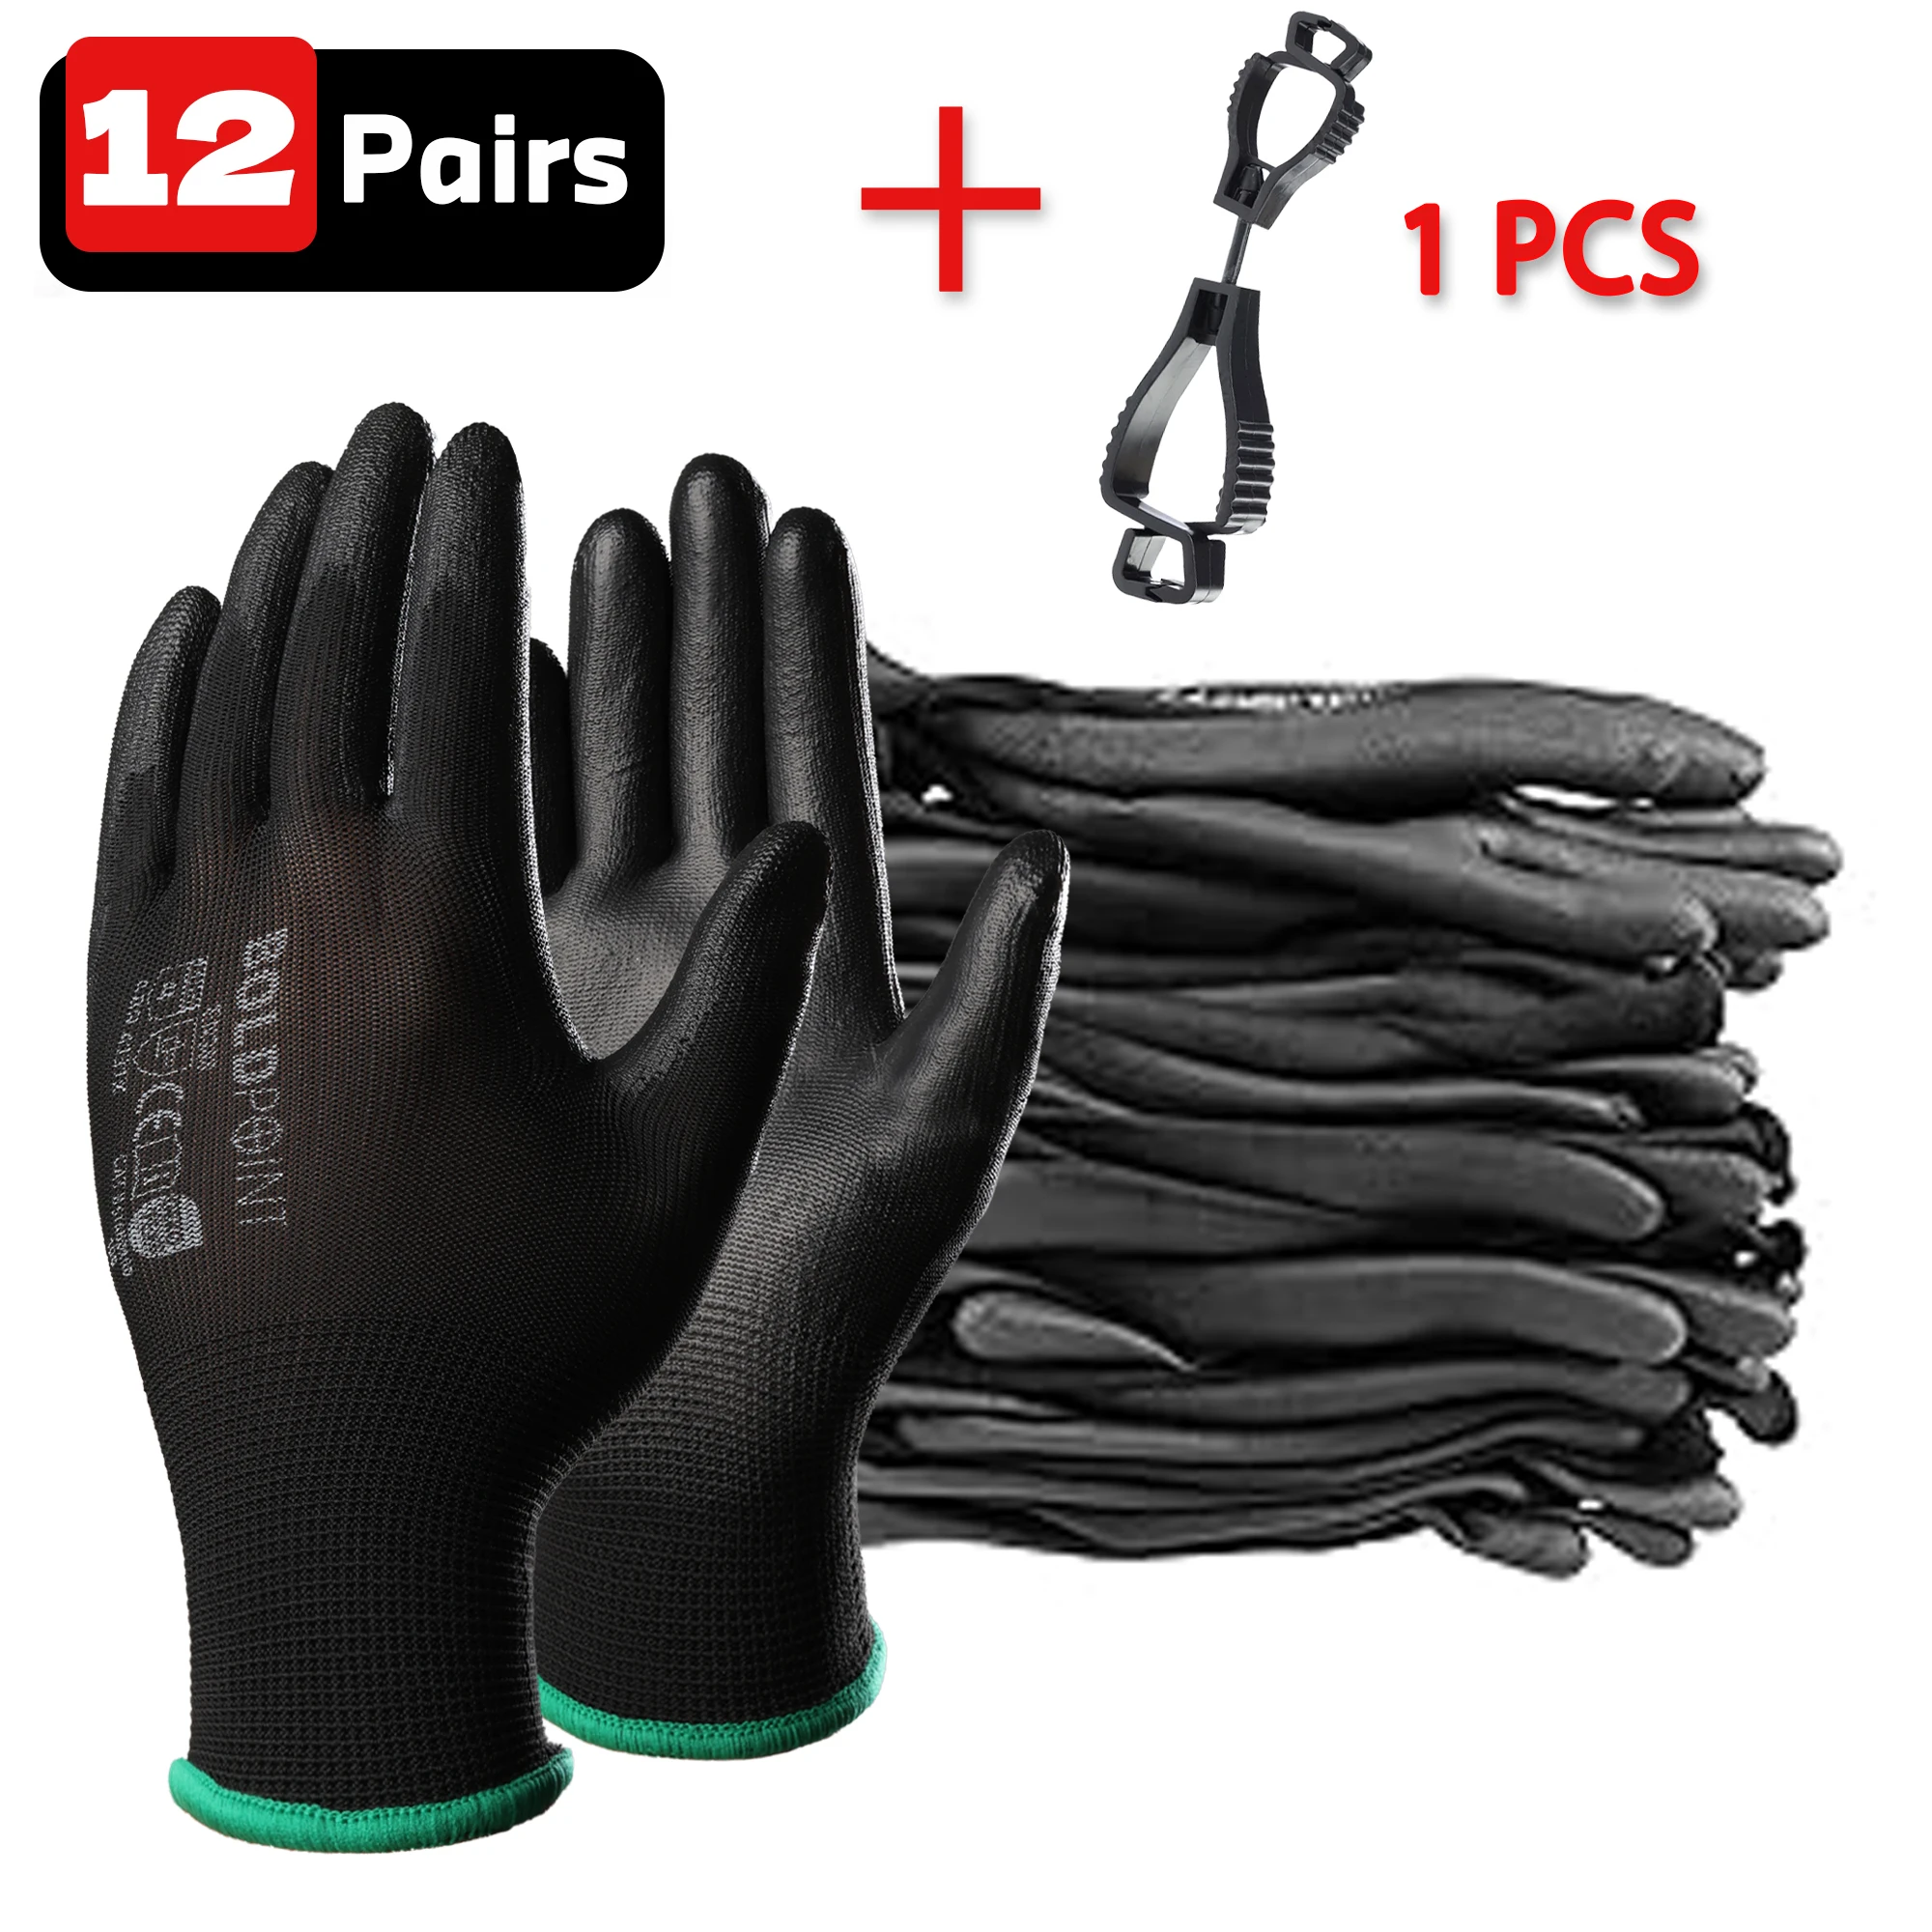 

12-Pairs Ultra-Thin Safety Gloves with Glove Clips: Superior Grip for Renovation, Gardening, Cleaning, DIY, Assembly, Repair